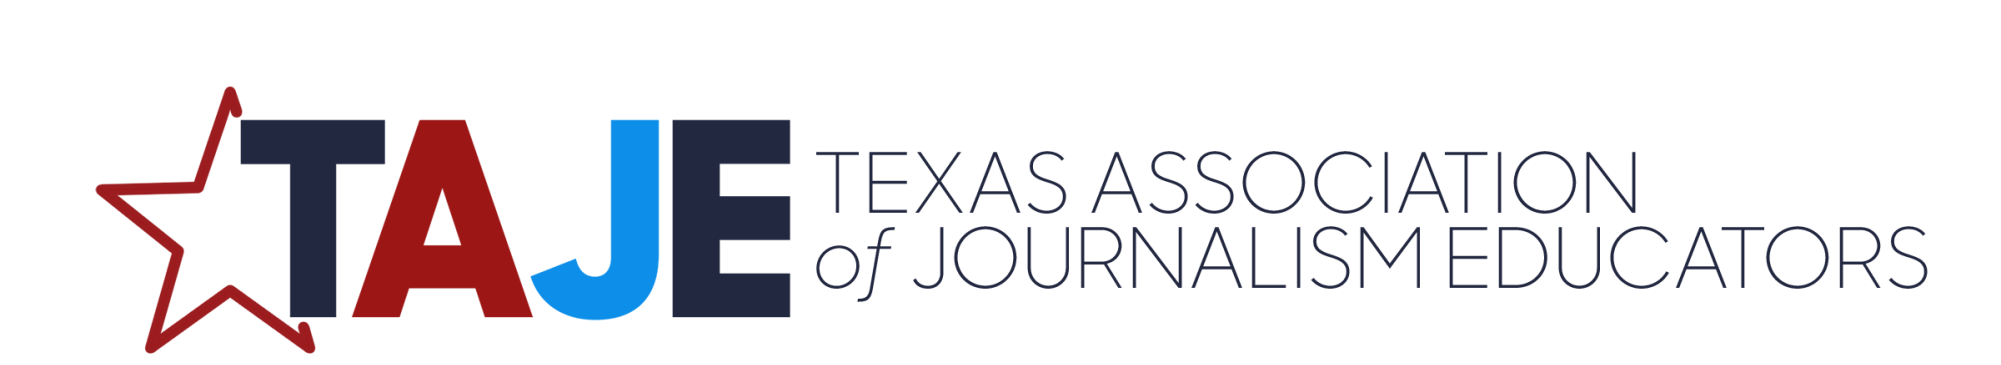 The official site of Texas Association of Journalism Educators